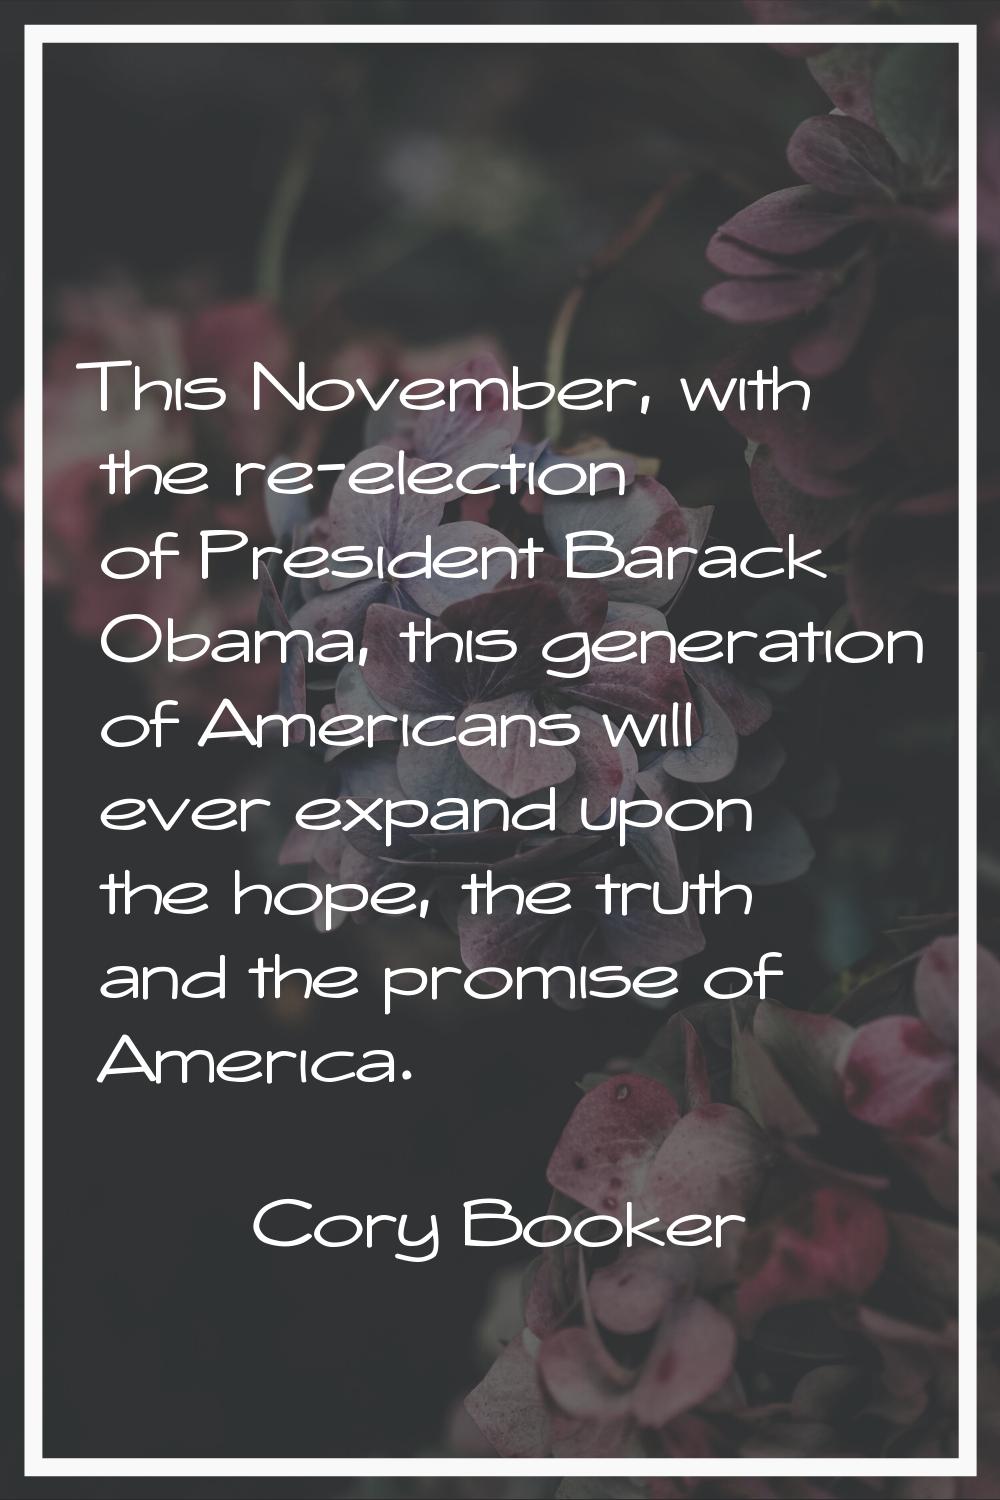 This November, with the re-election of President Barack Obama, this generation of Americans will ev